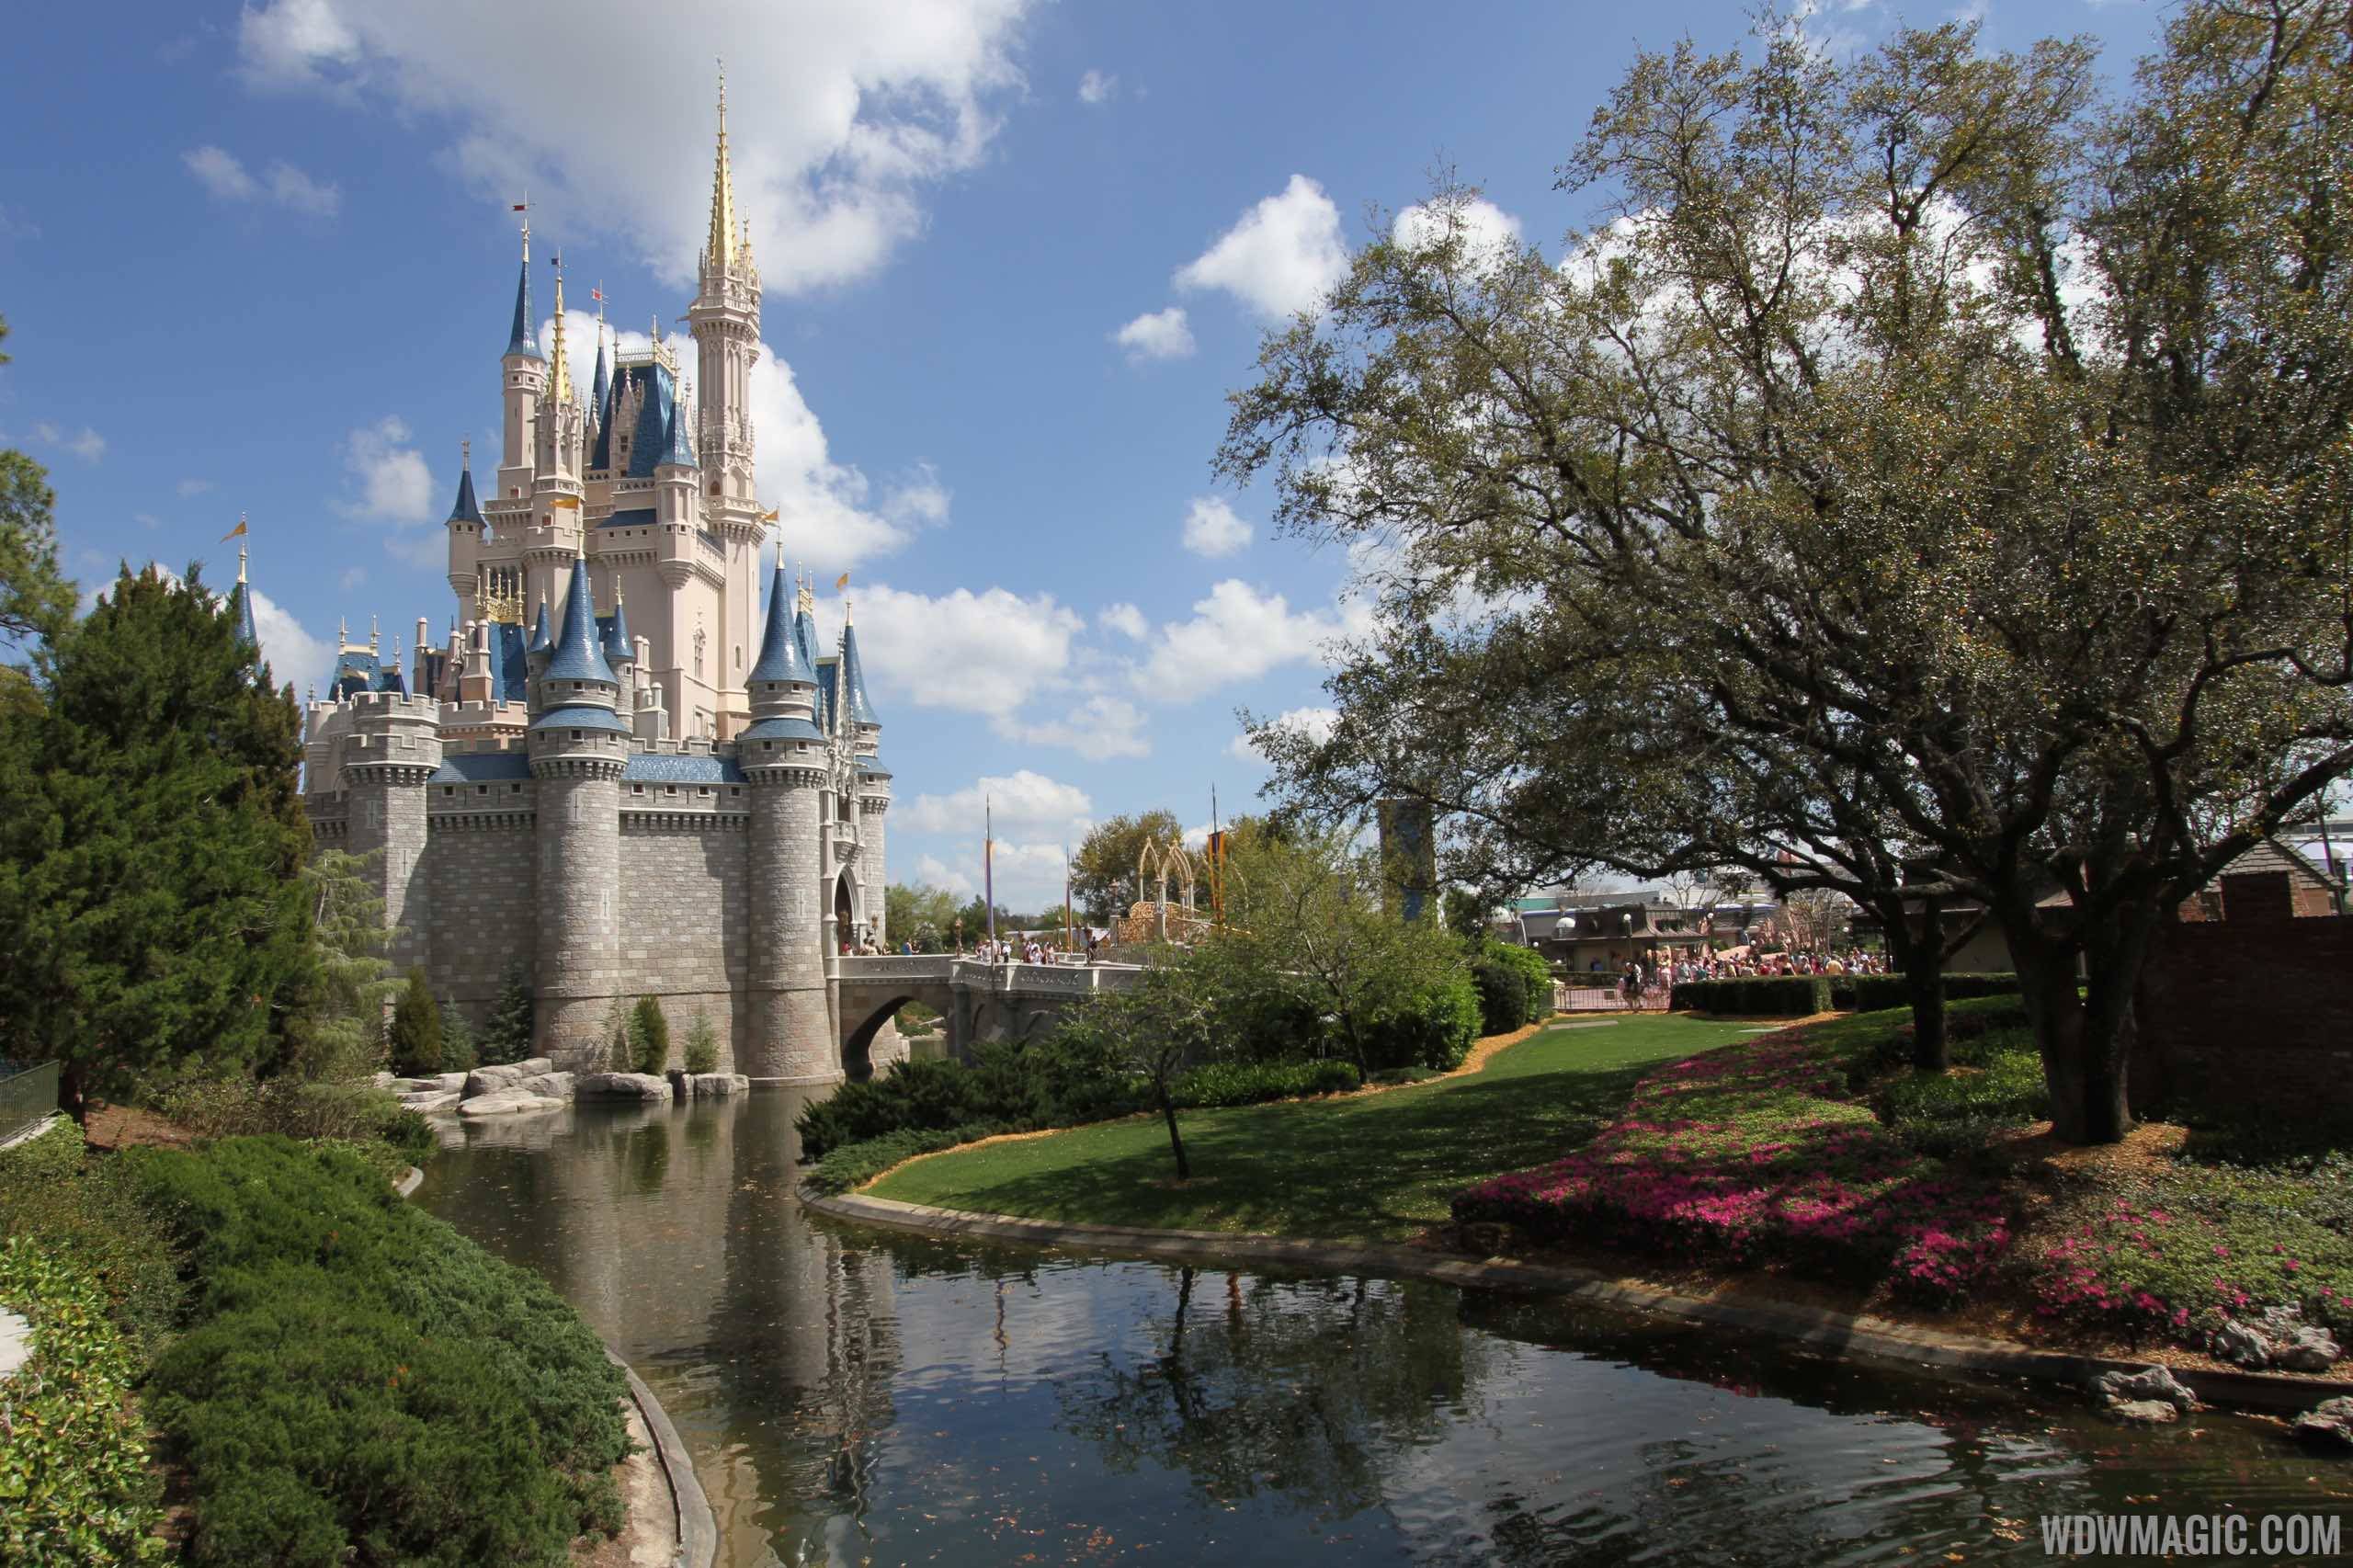 The Ultimate Disney Classics VIP Tour now available at the Magic Kingdom